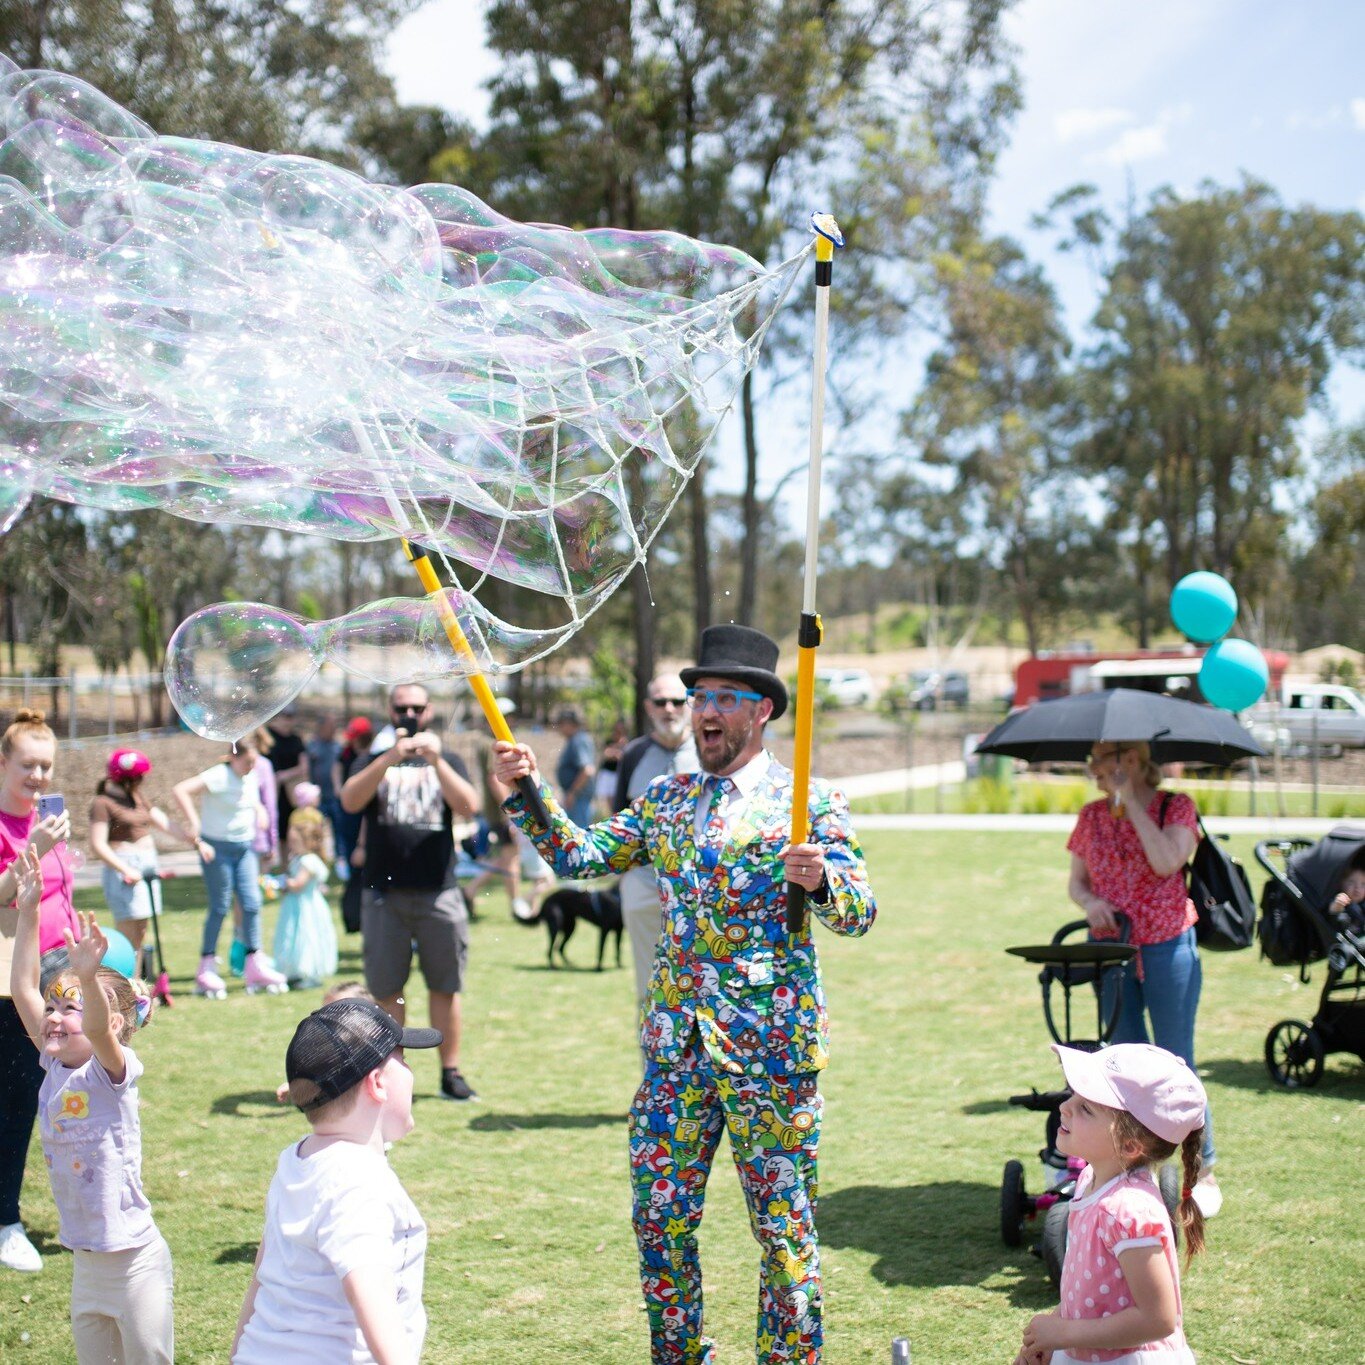 Did you go to the Falling Leaf Festival, Tumut last month?  If you did you will be familiar with The Pretty Amazing Jono. If you missed him, make sure you get to CiderFest tomorrow as he will be there!

Part Magician, part Mad Scientist and part MacG